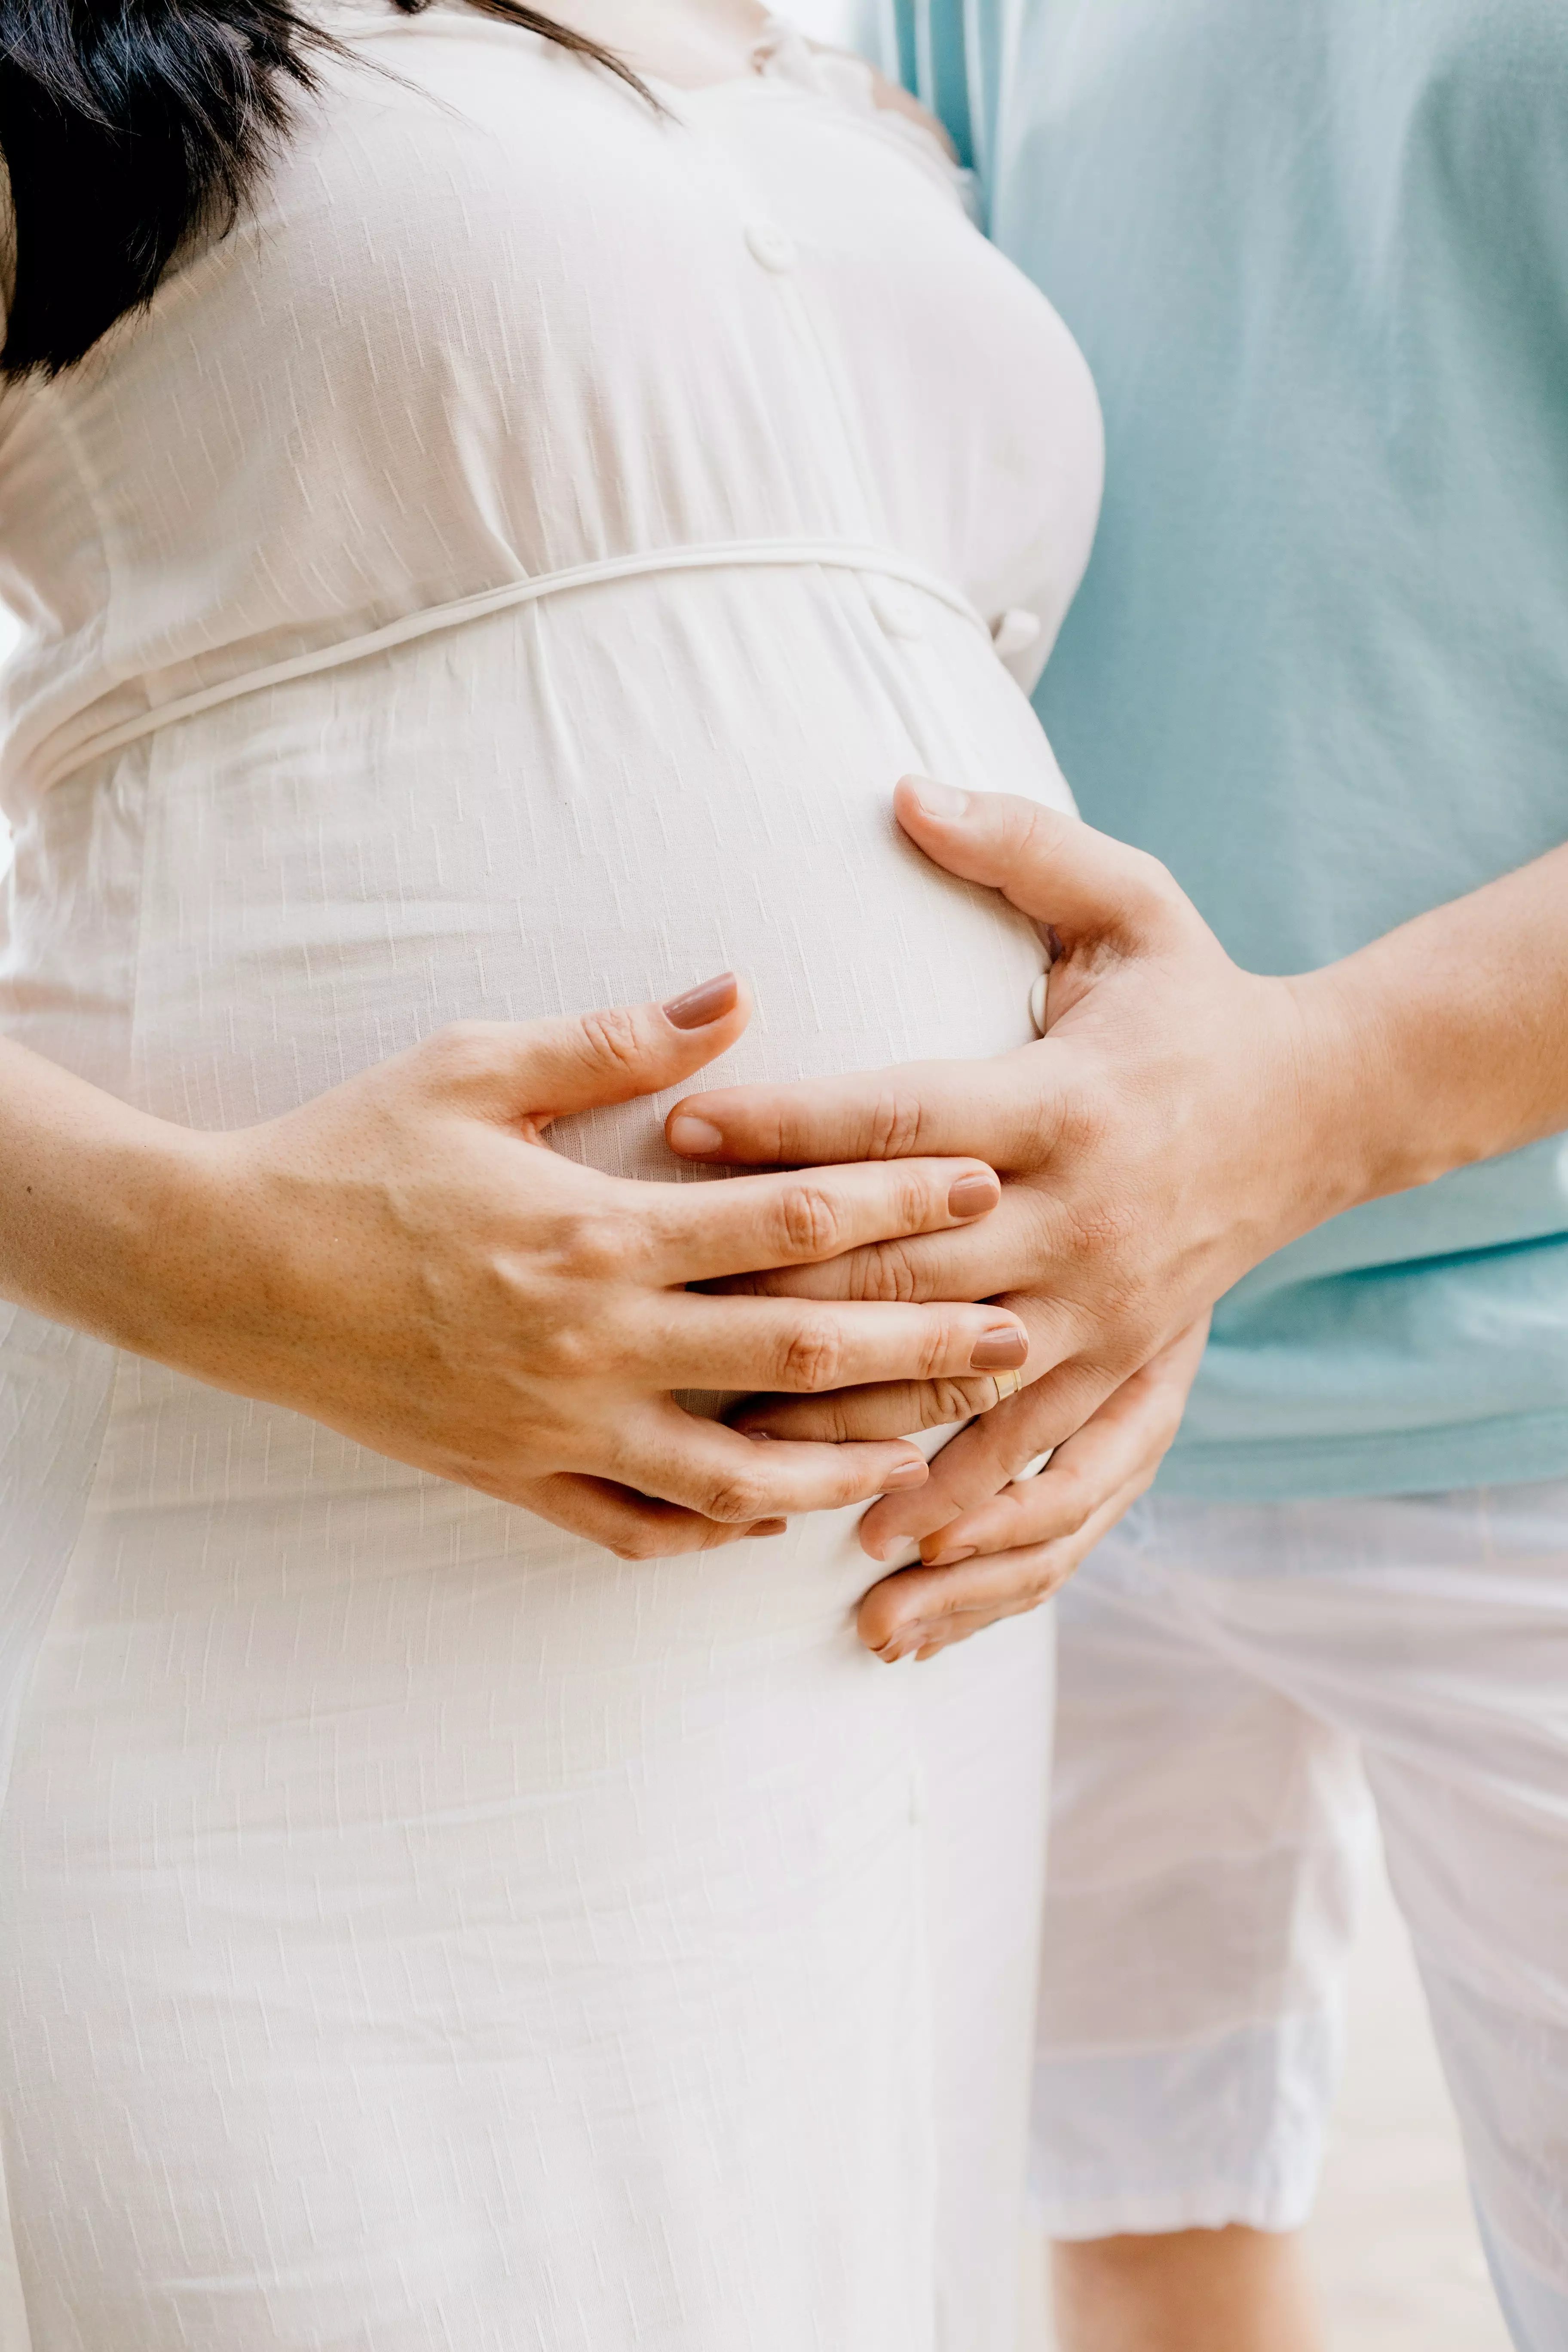 The pregnant bridesmaids were told they'd have to leave their newborns (